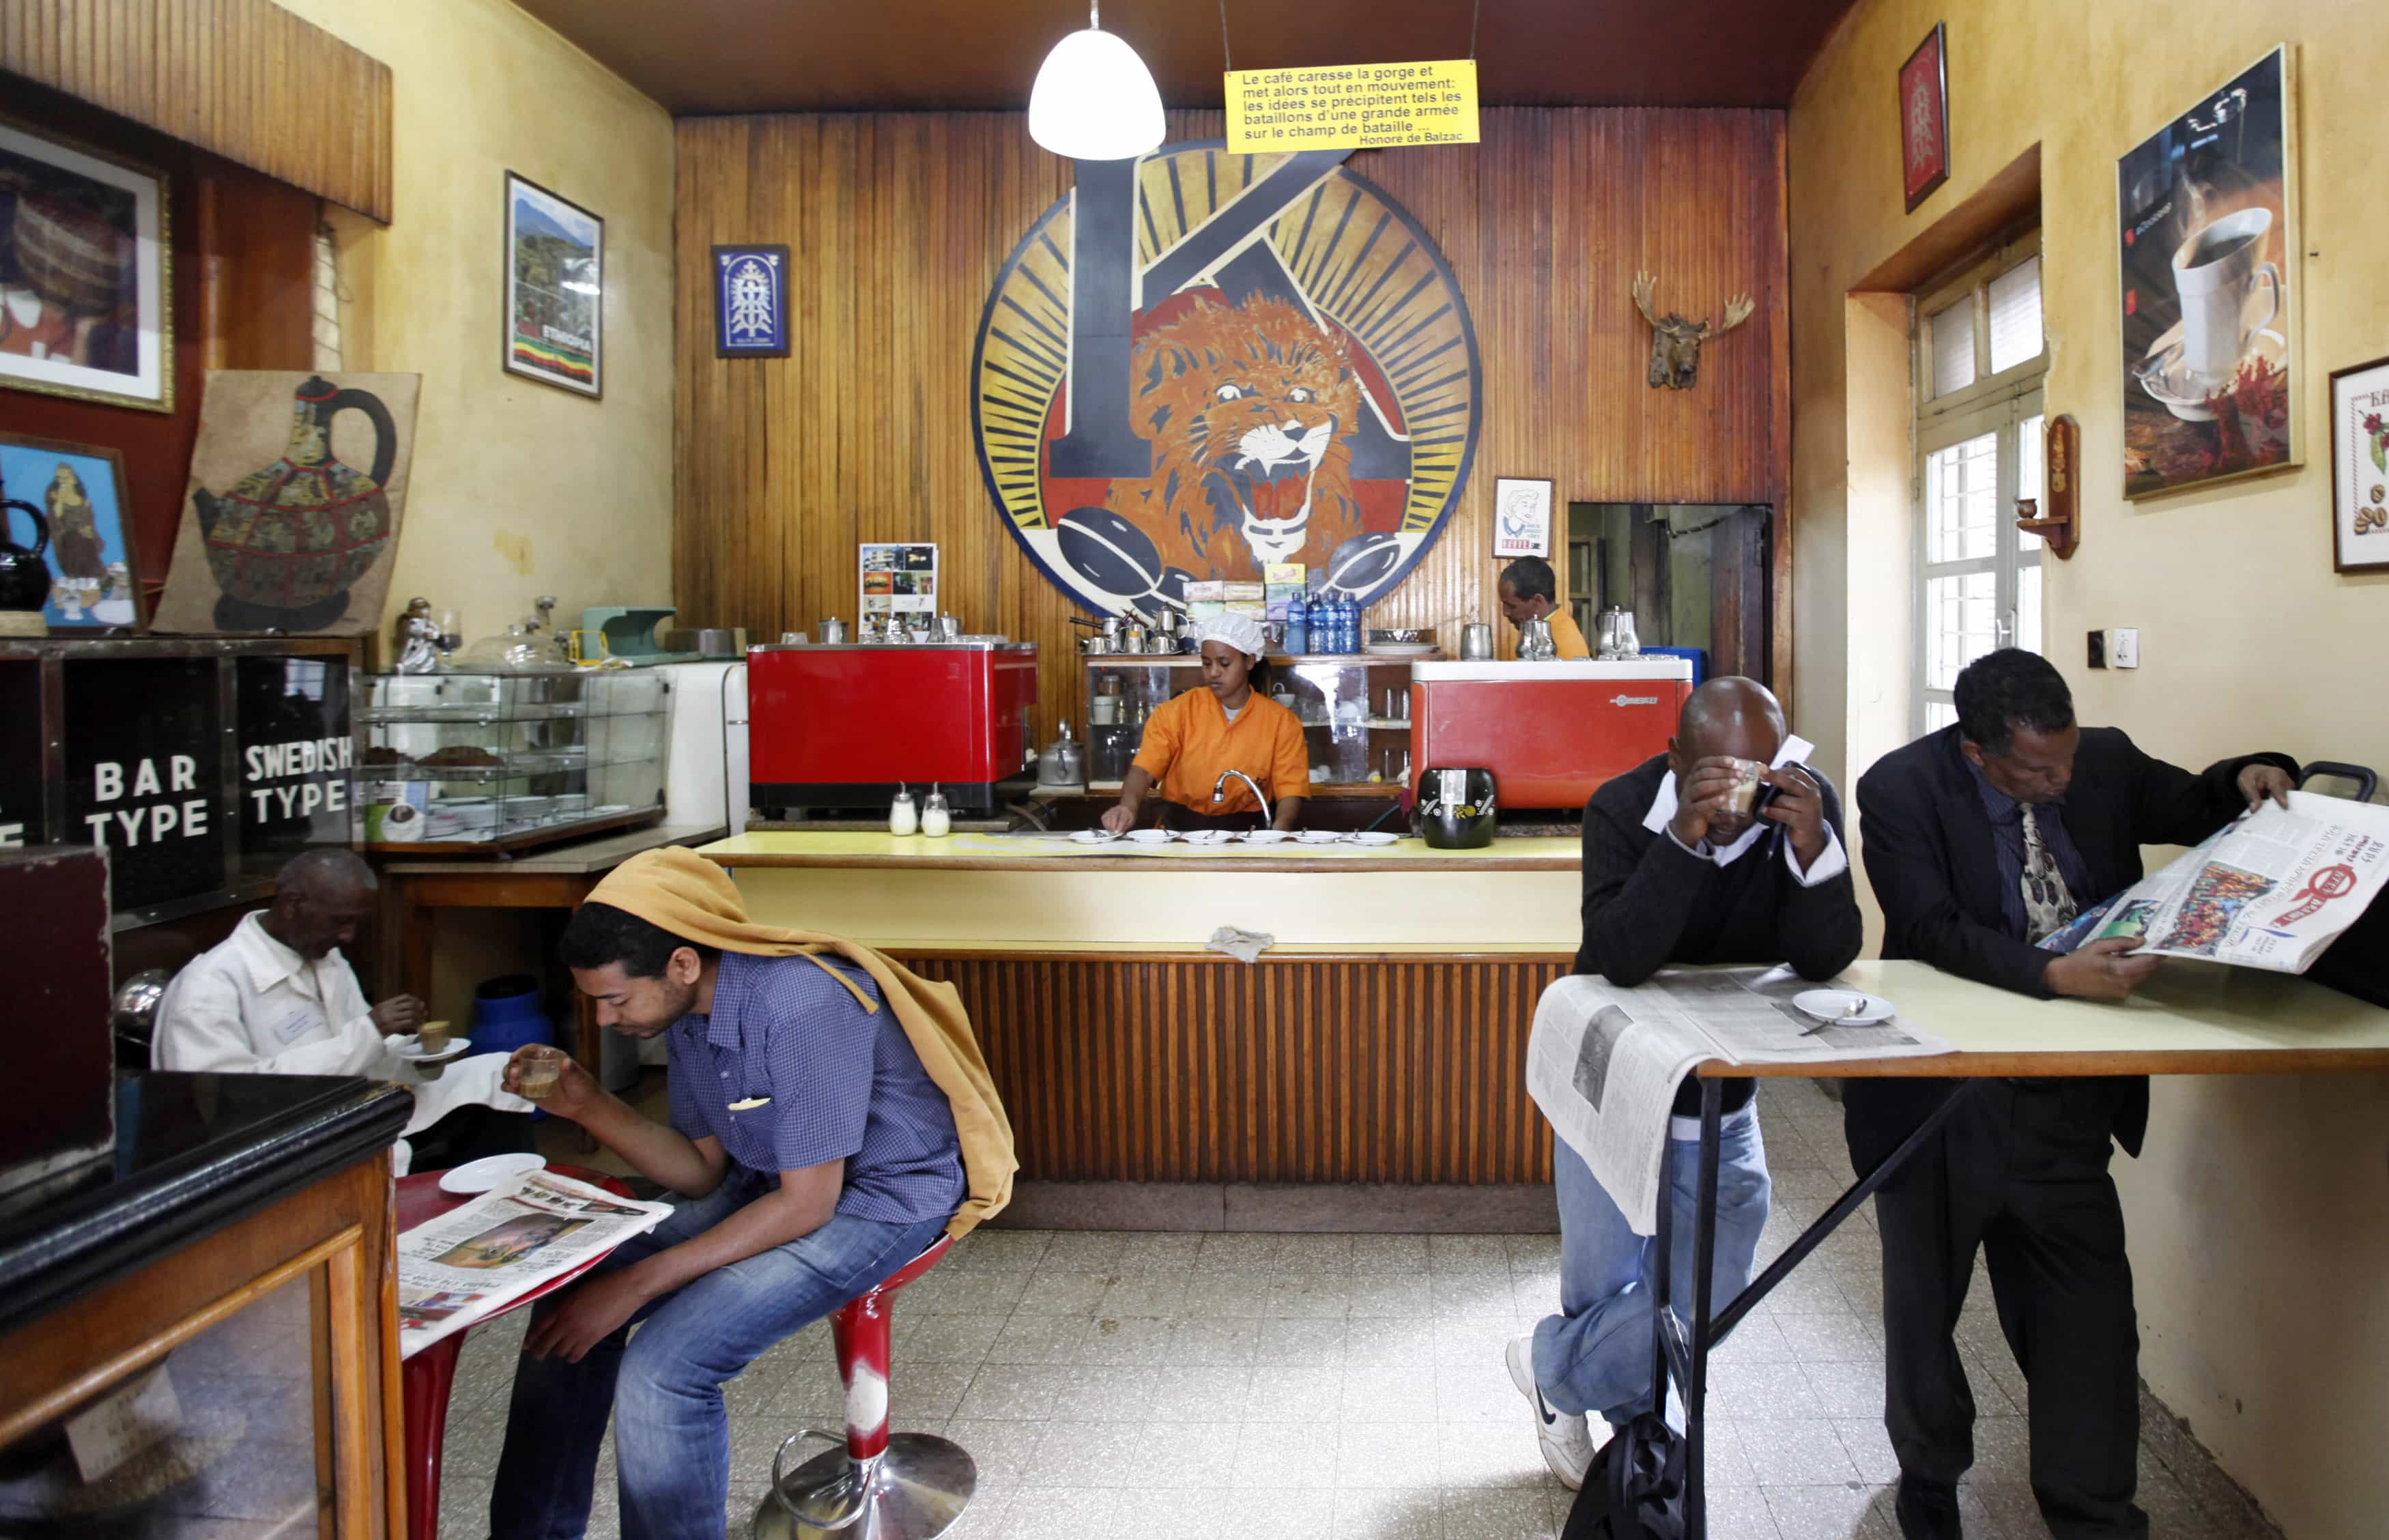 Customers drink coffee as they read newspapers at the Tamoka coffee bar in Addis Ababa, 16 September 2013, Reuters/Stringer